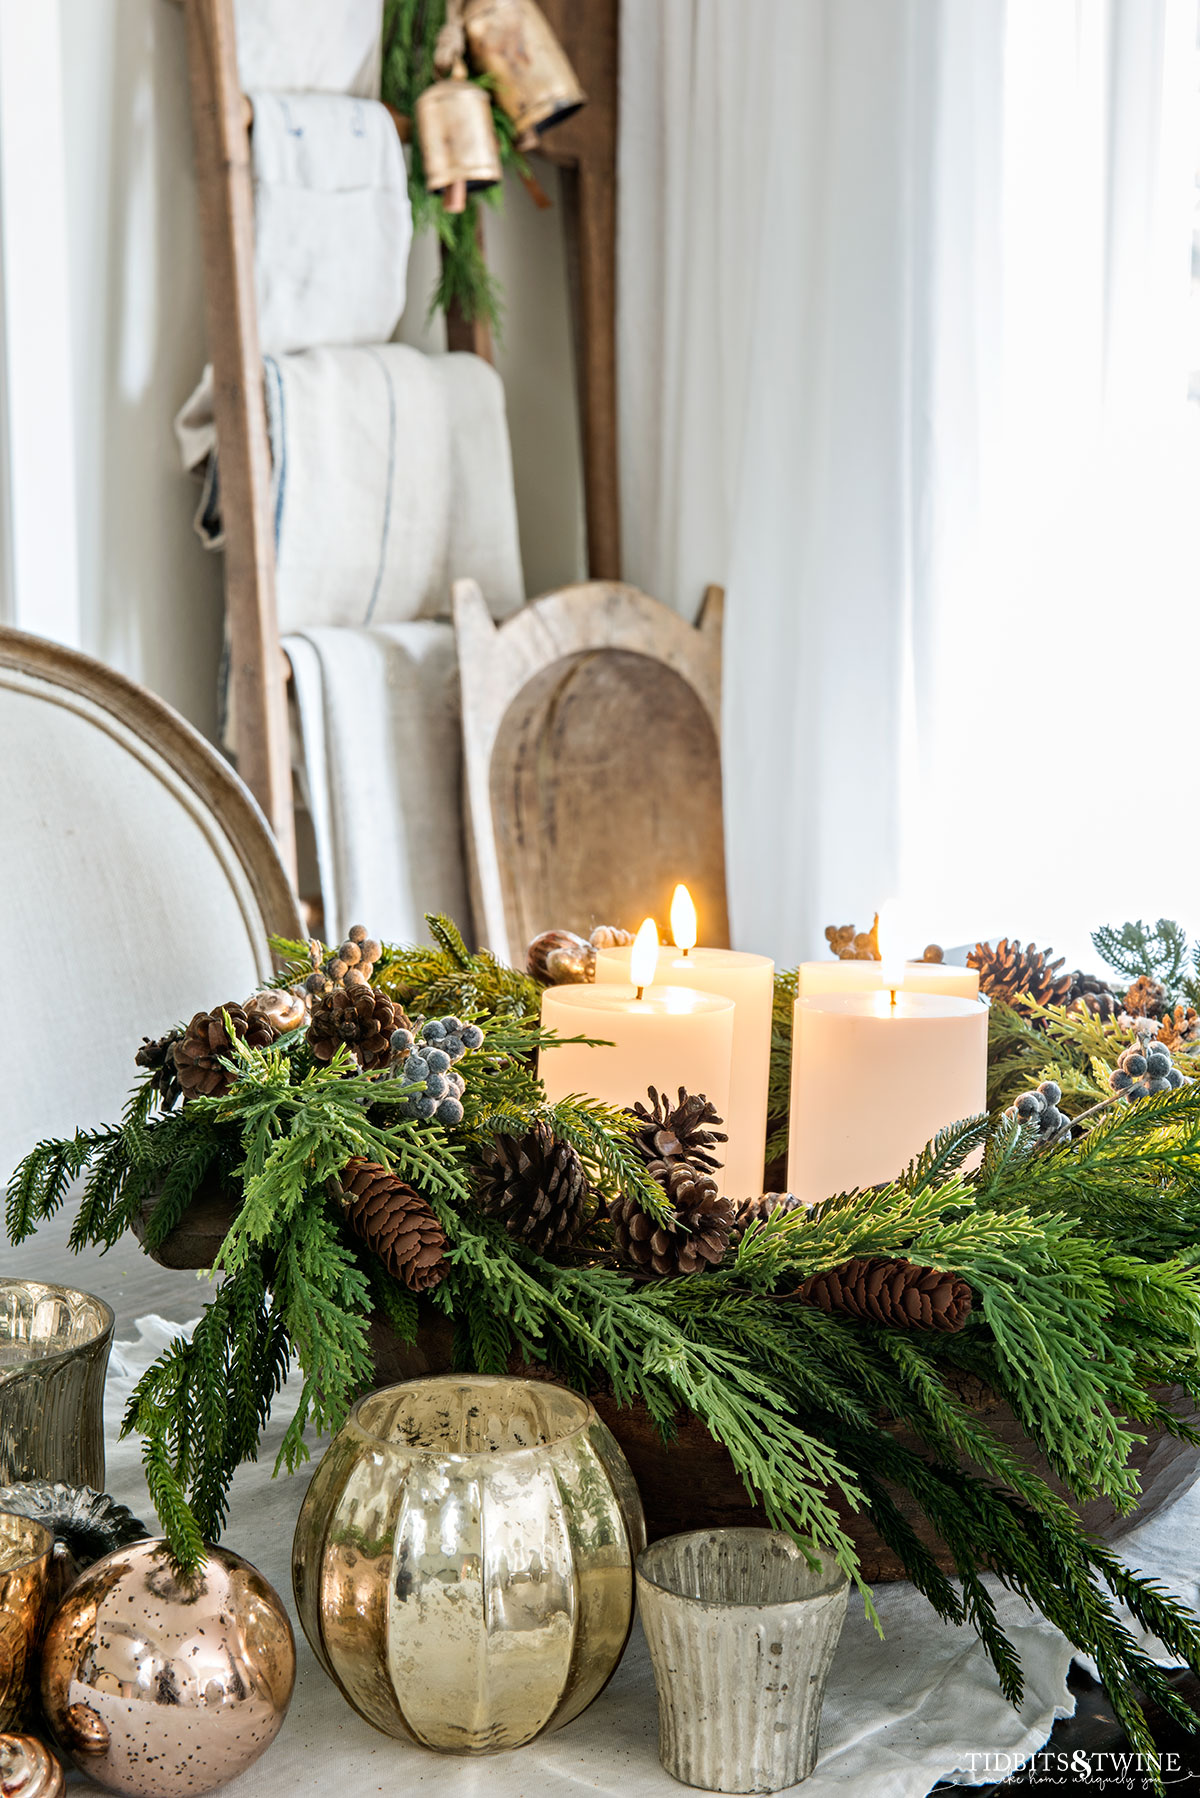 dining table with diy advent wreath in center with four white pillar candles and mercury glass votives on the table